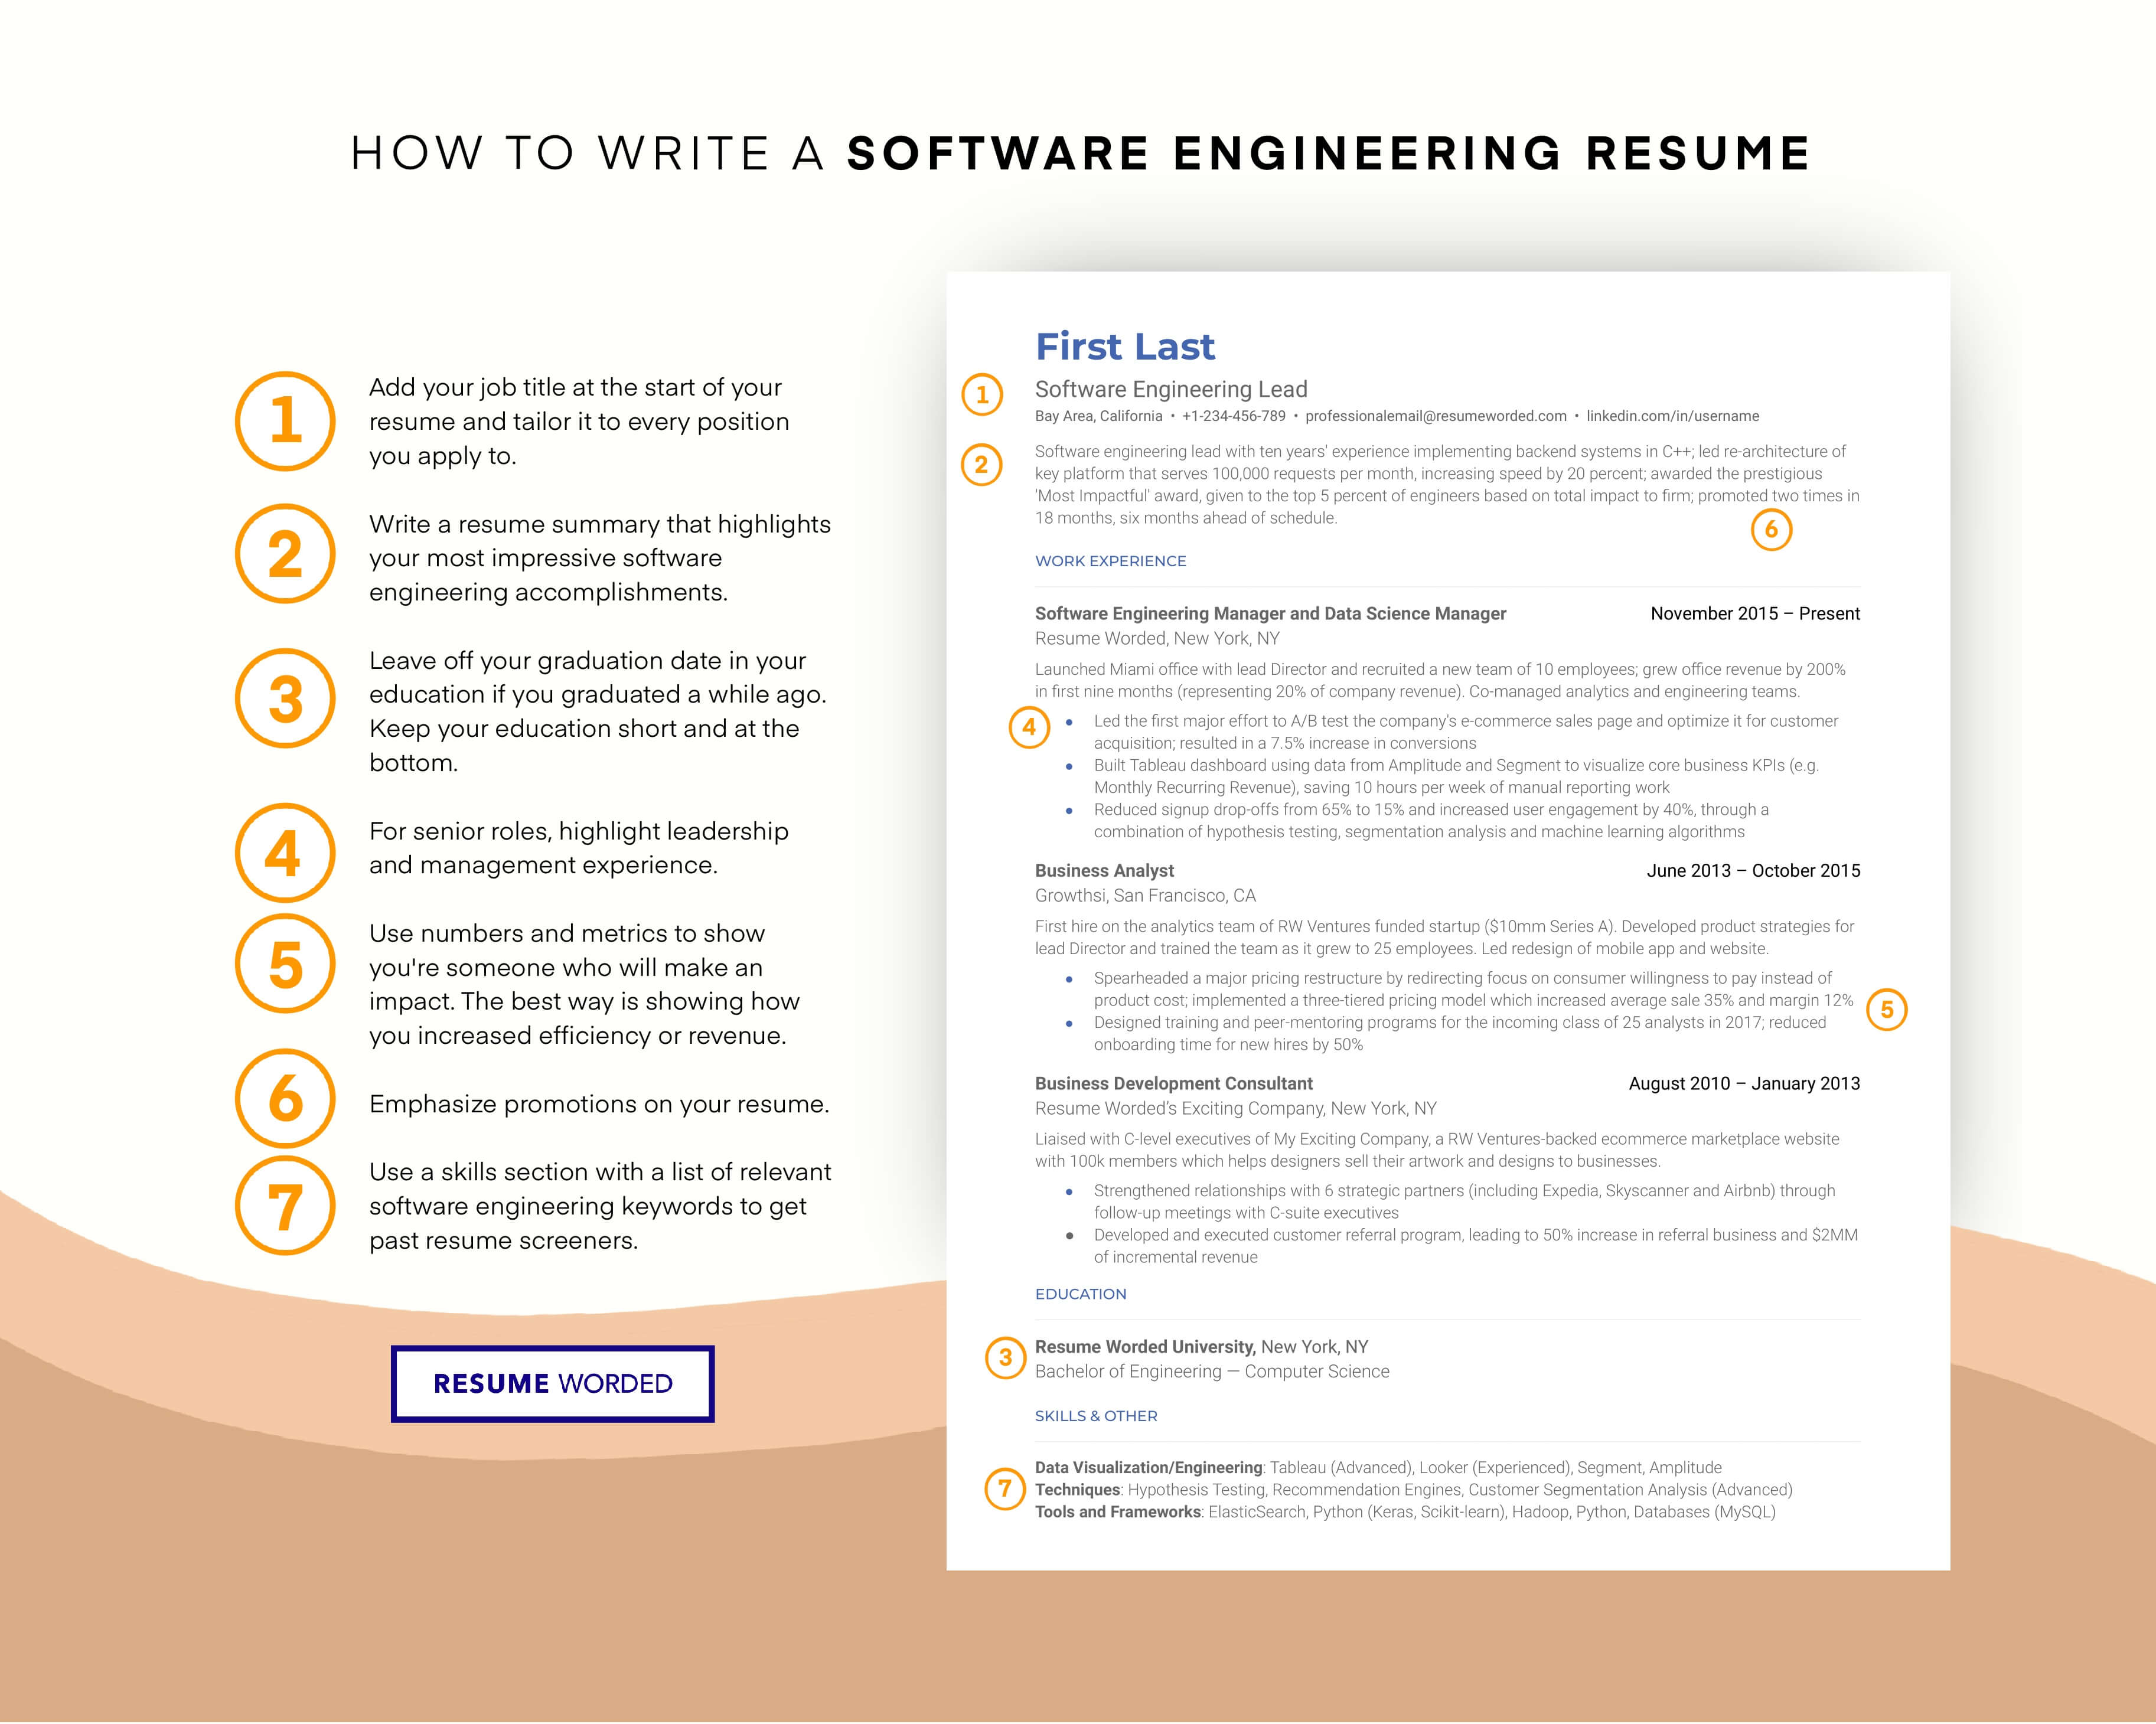 Numbers and metrics relevant to software test engineers - Software Test Engineer Resume